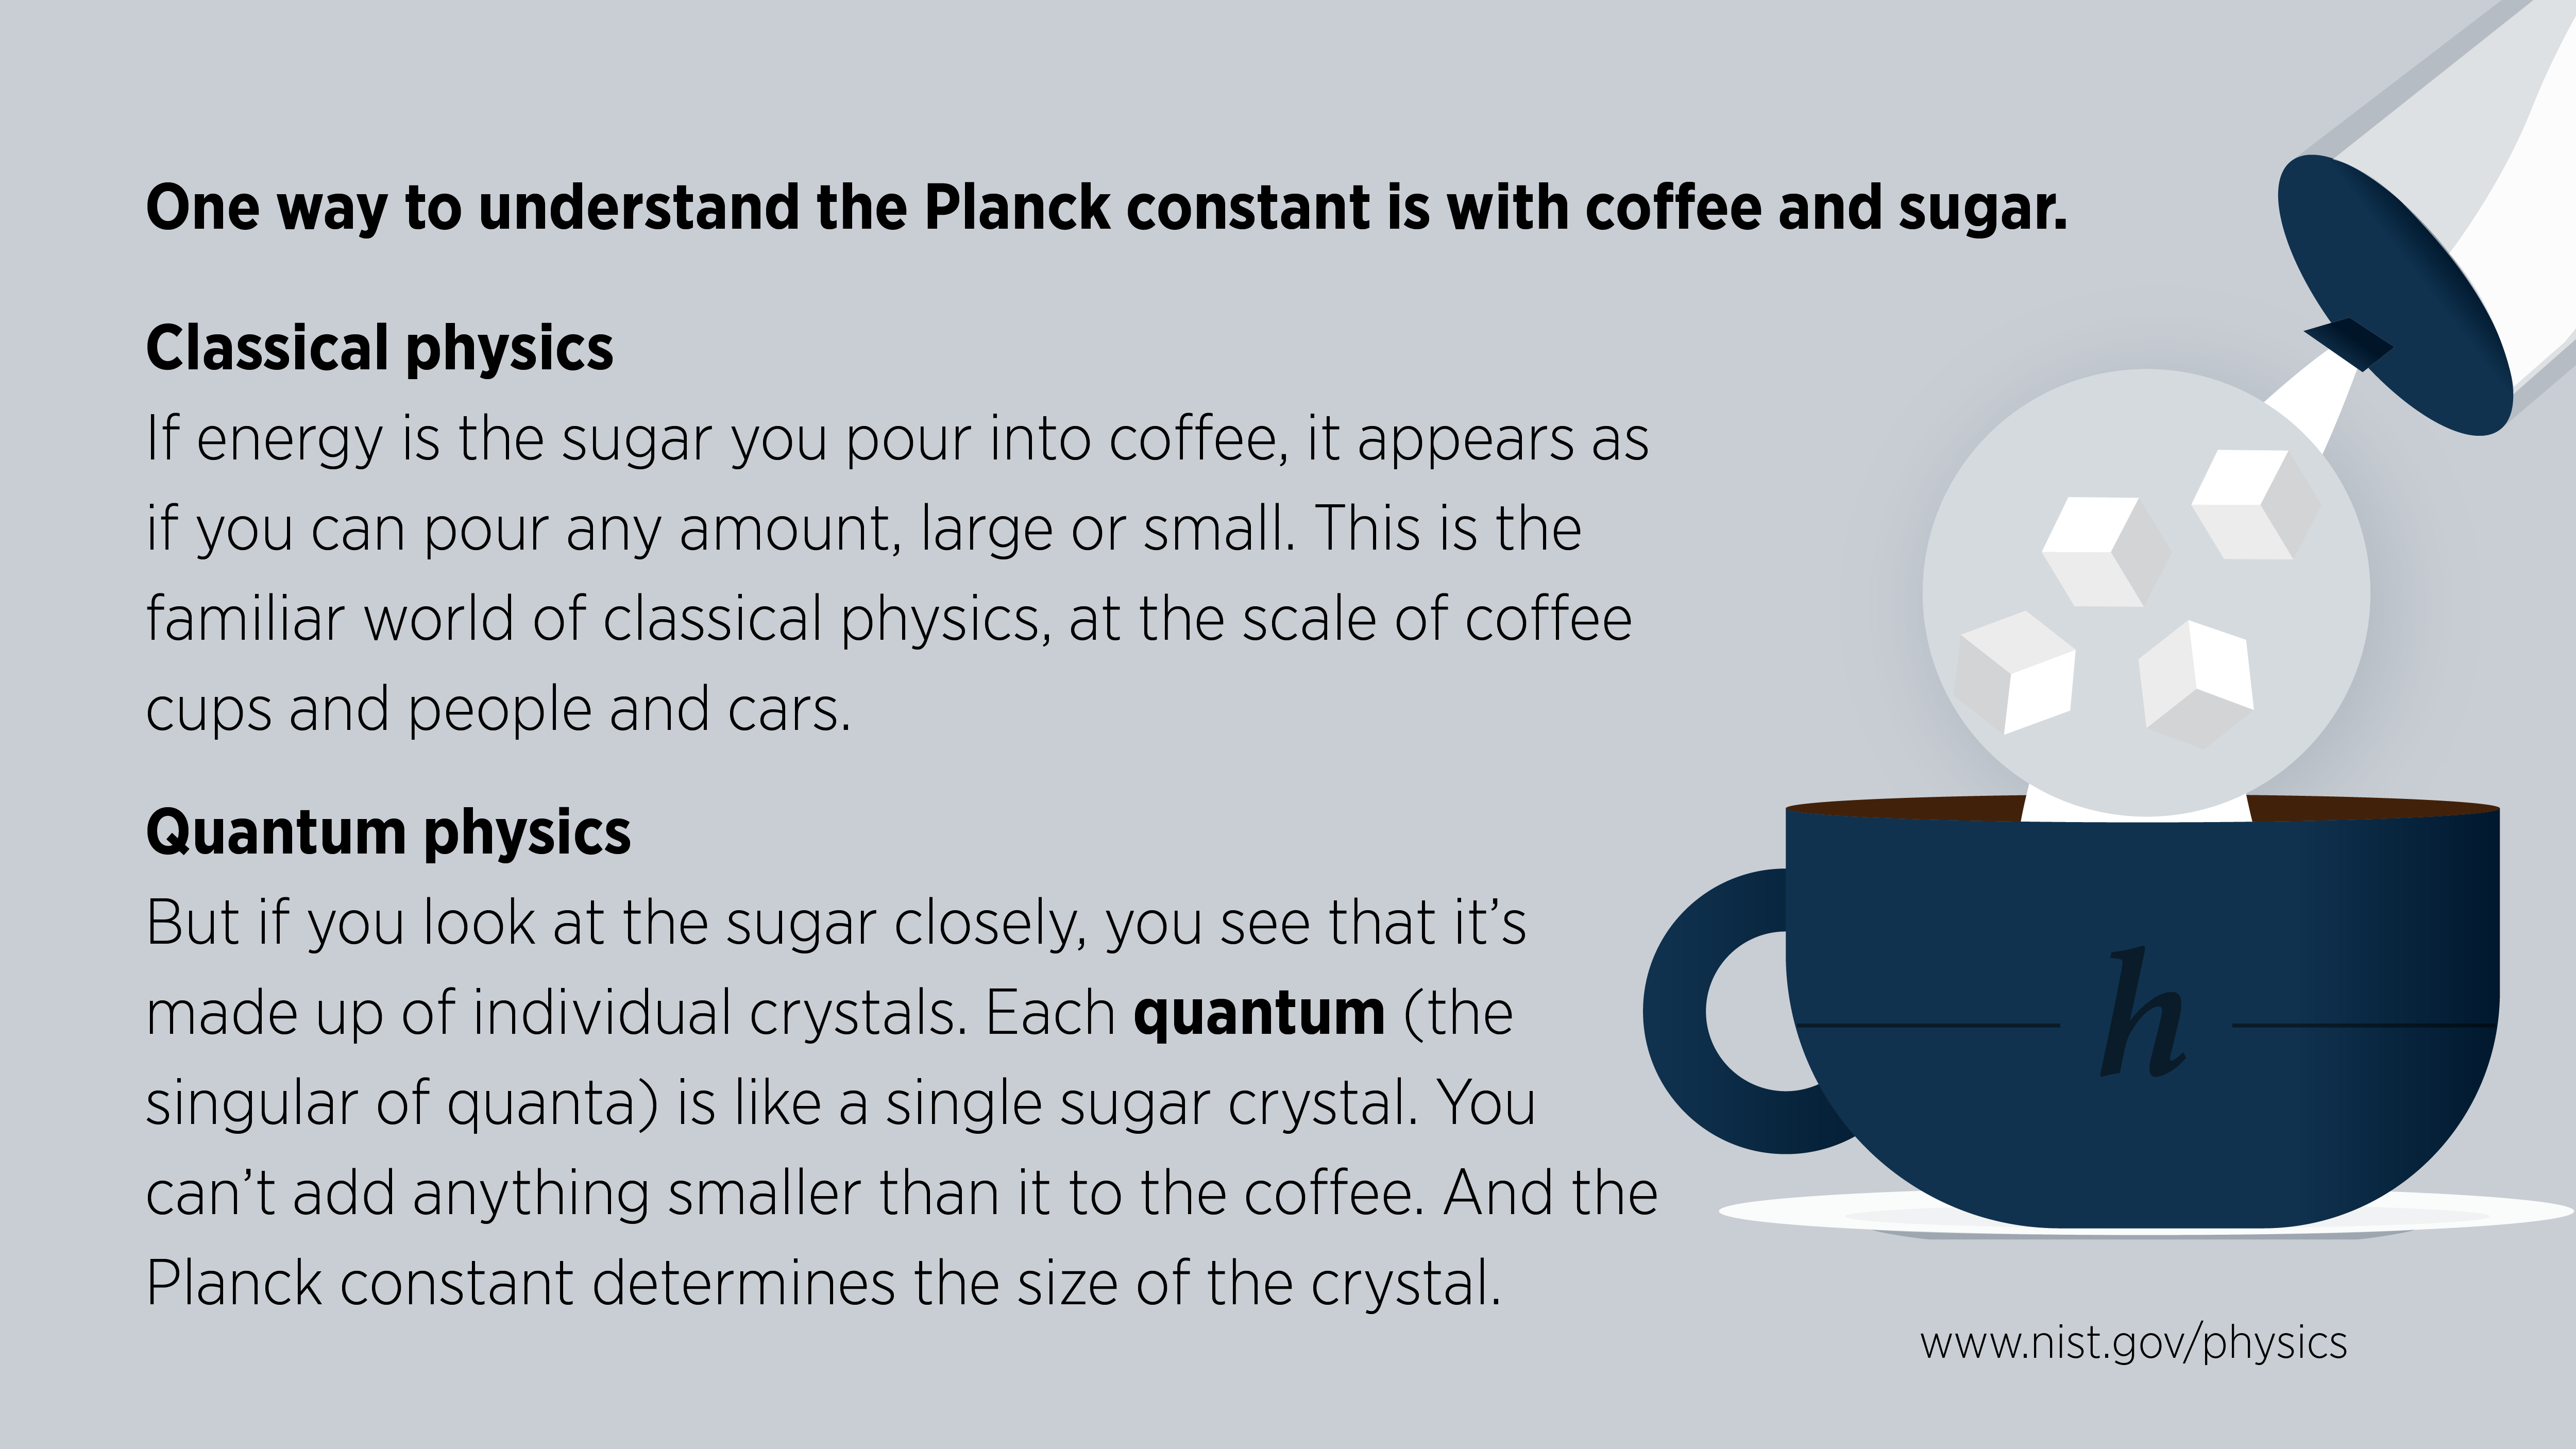 Illustration explains the Planck Constant using the example of coffee and sugar.